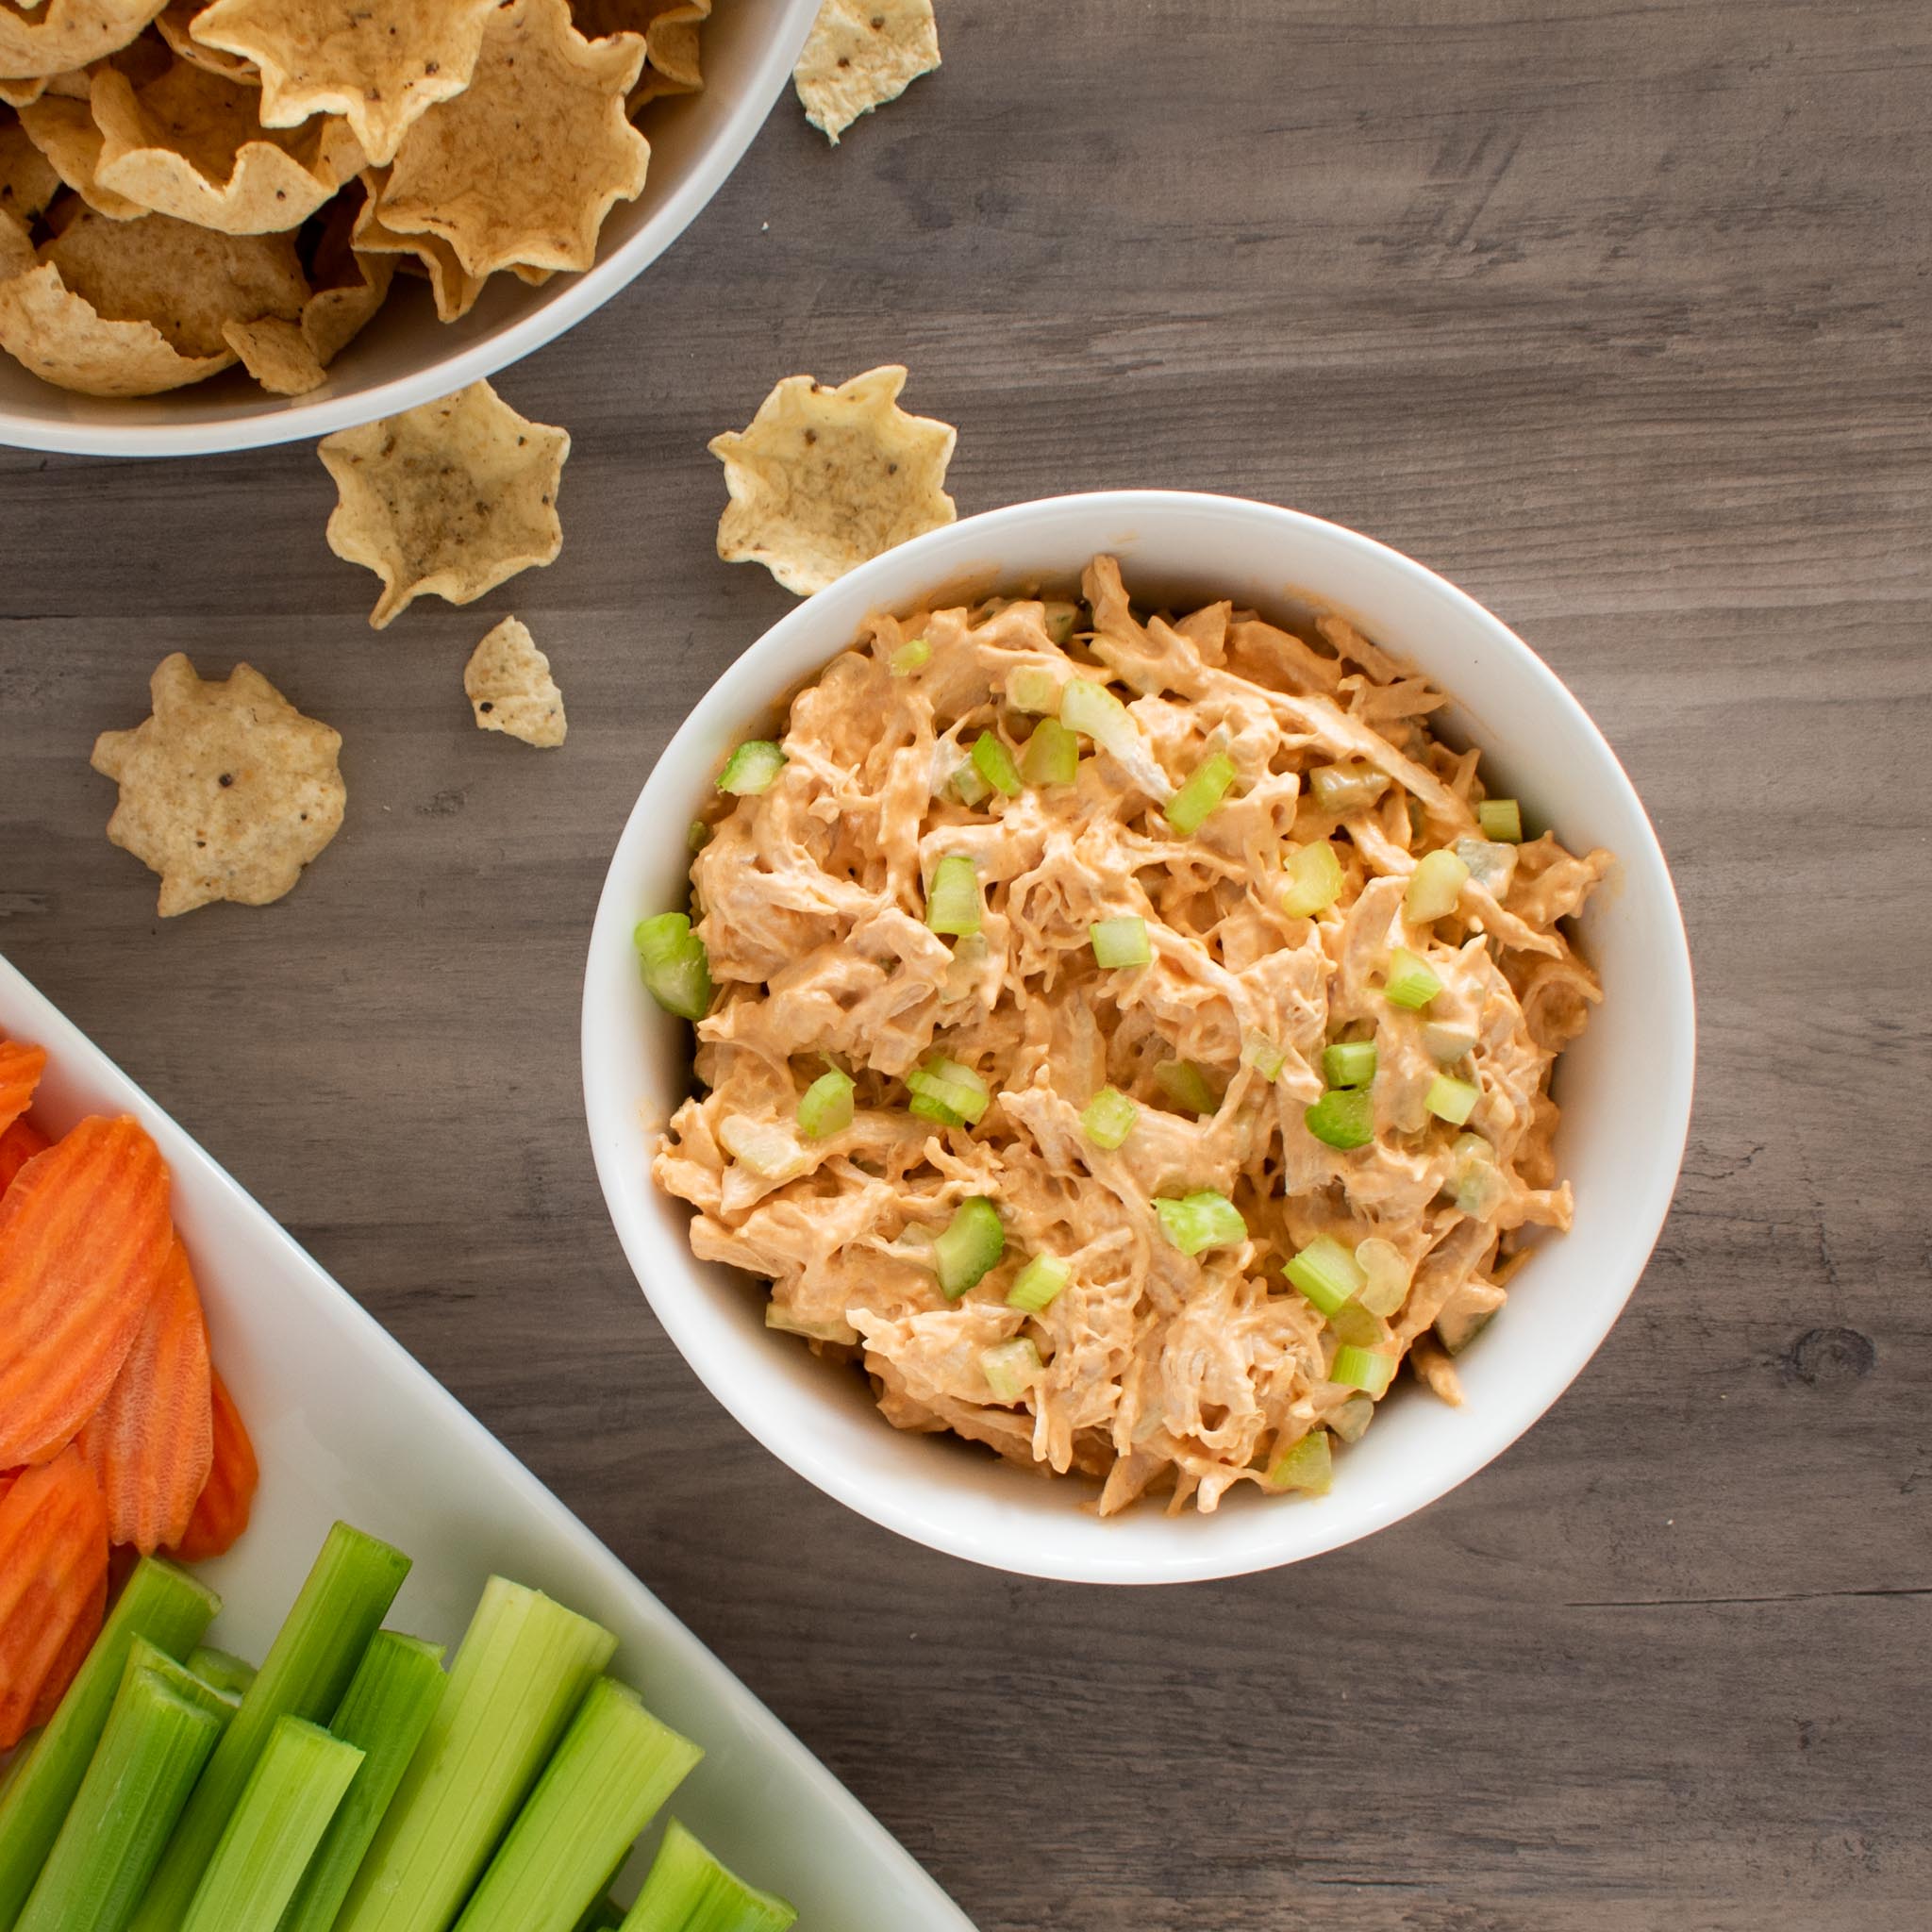 bowl of buffalo chicken dip, plate of celery sticks and carrot chips, bowl of tostitos chips.